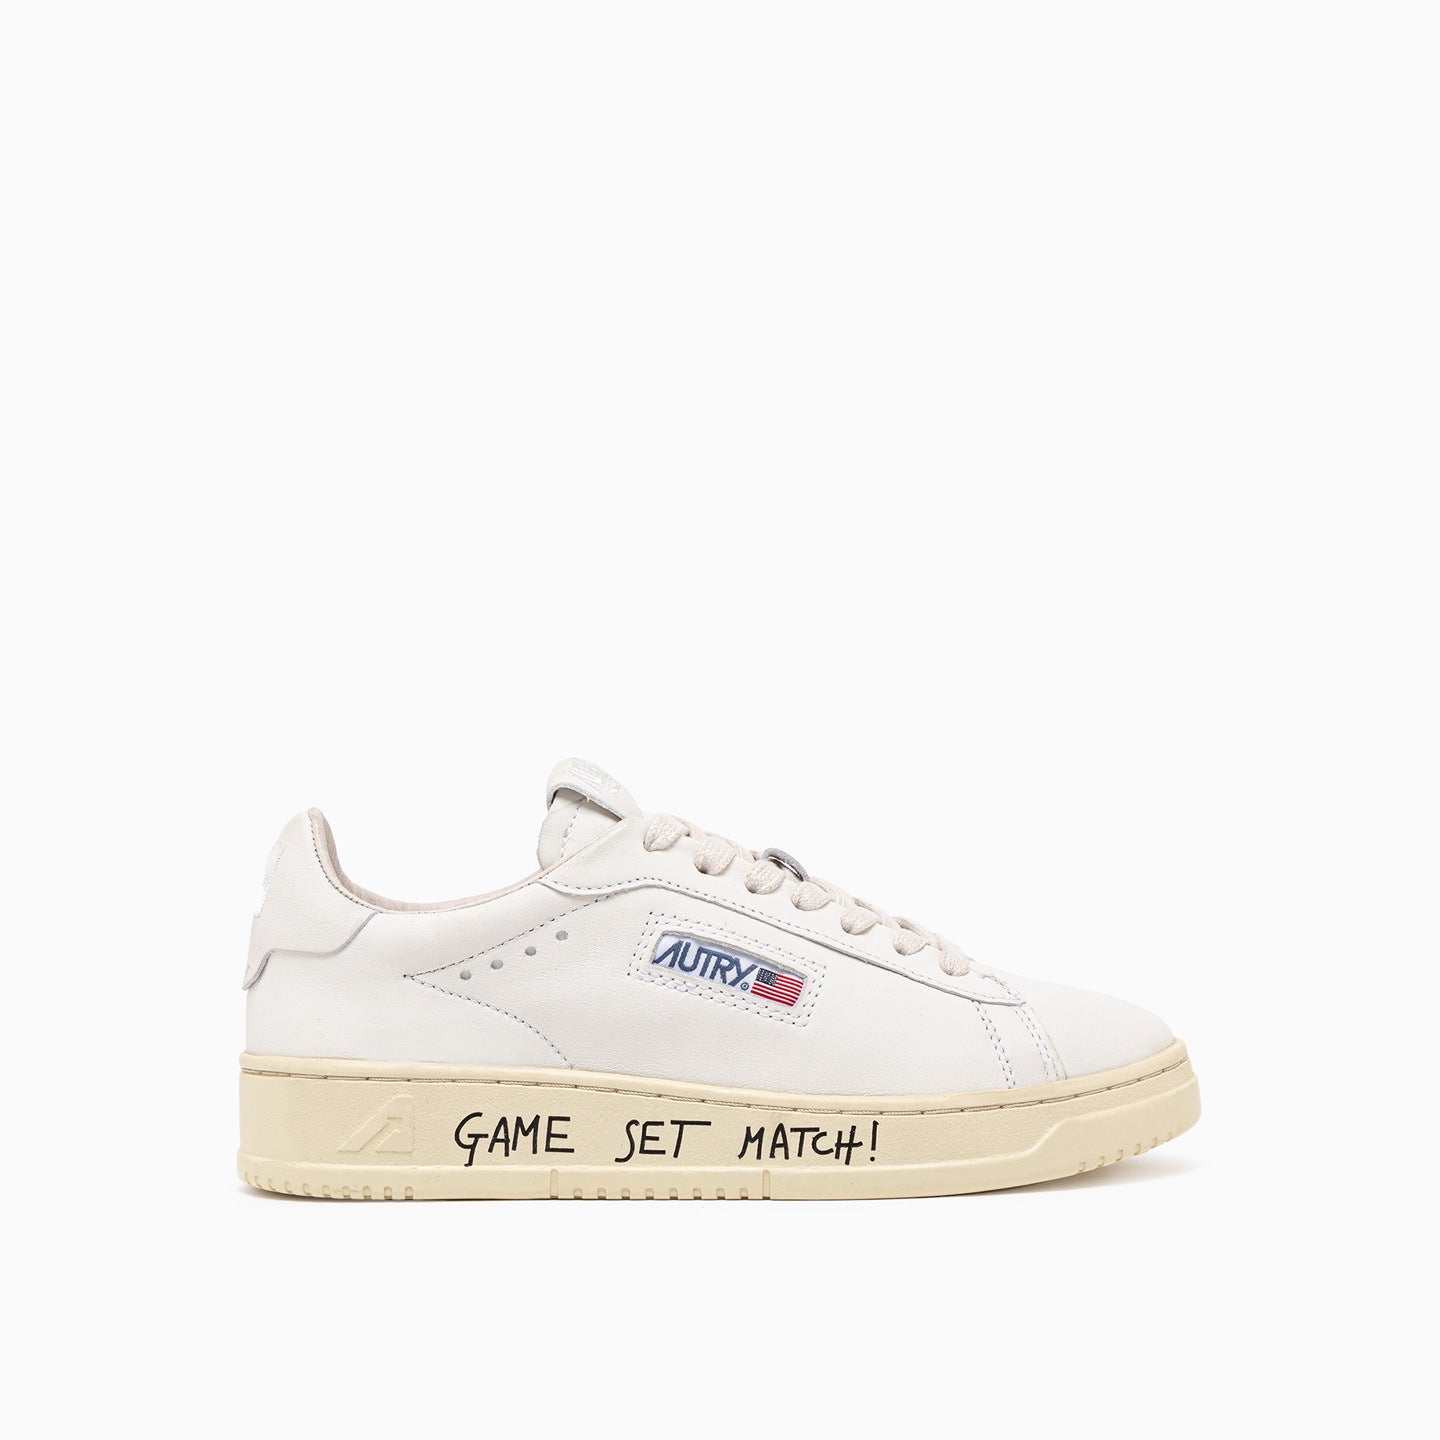 Dallas Low Sneakers in Leather color White and Lettering